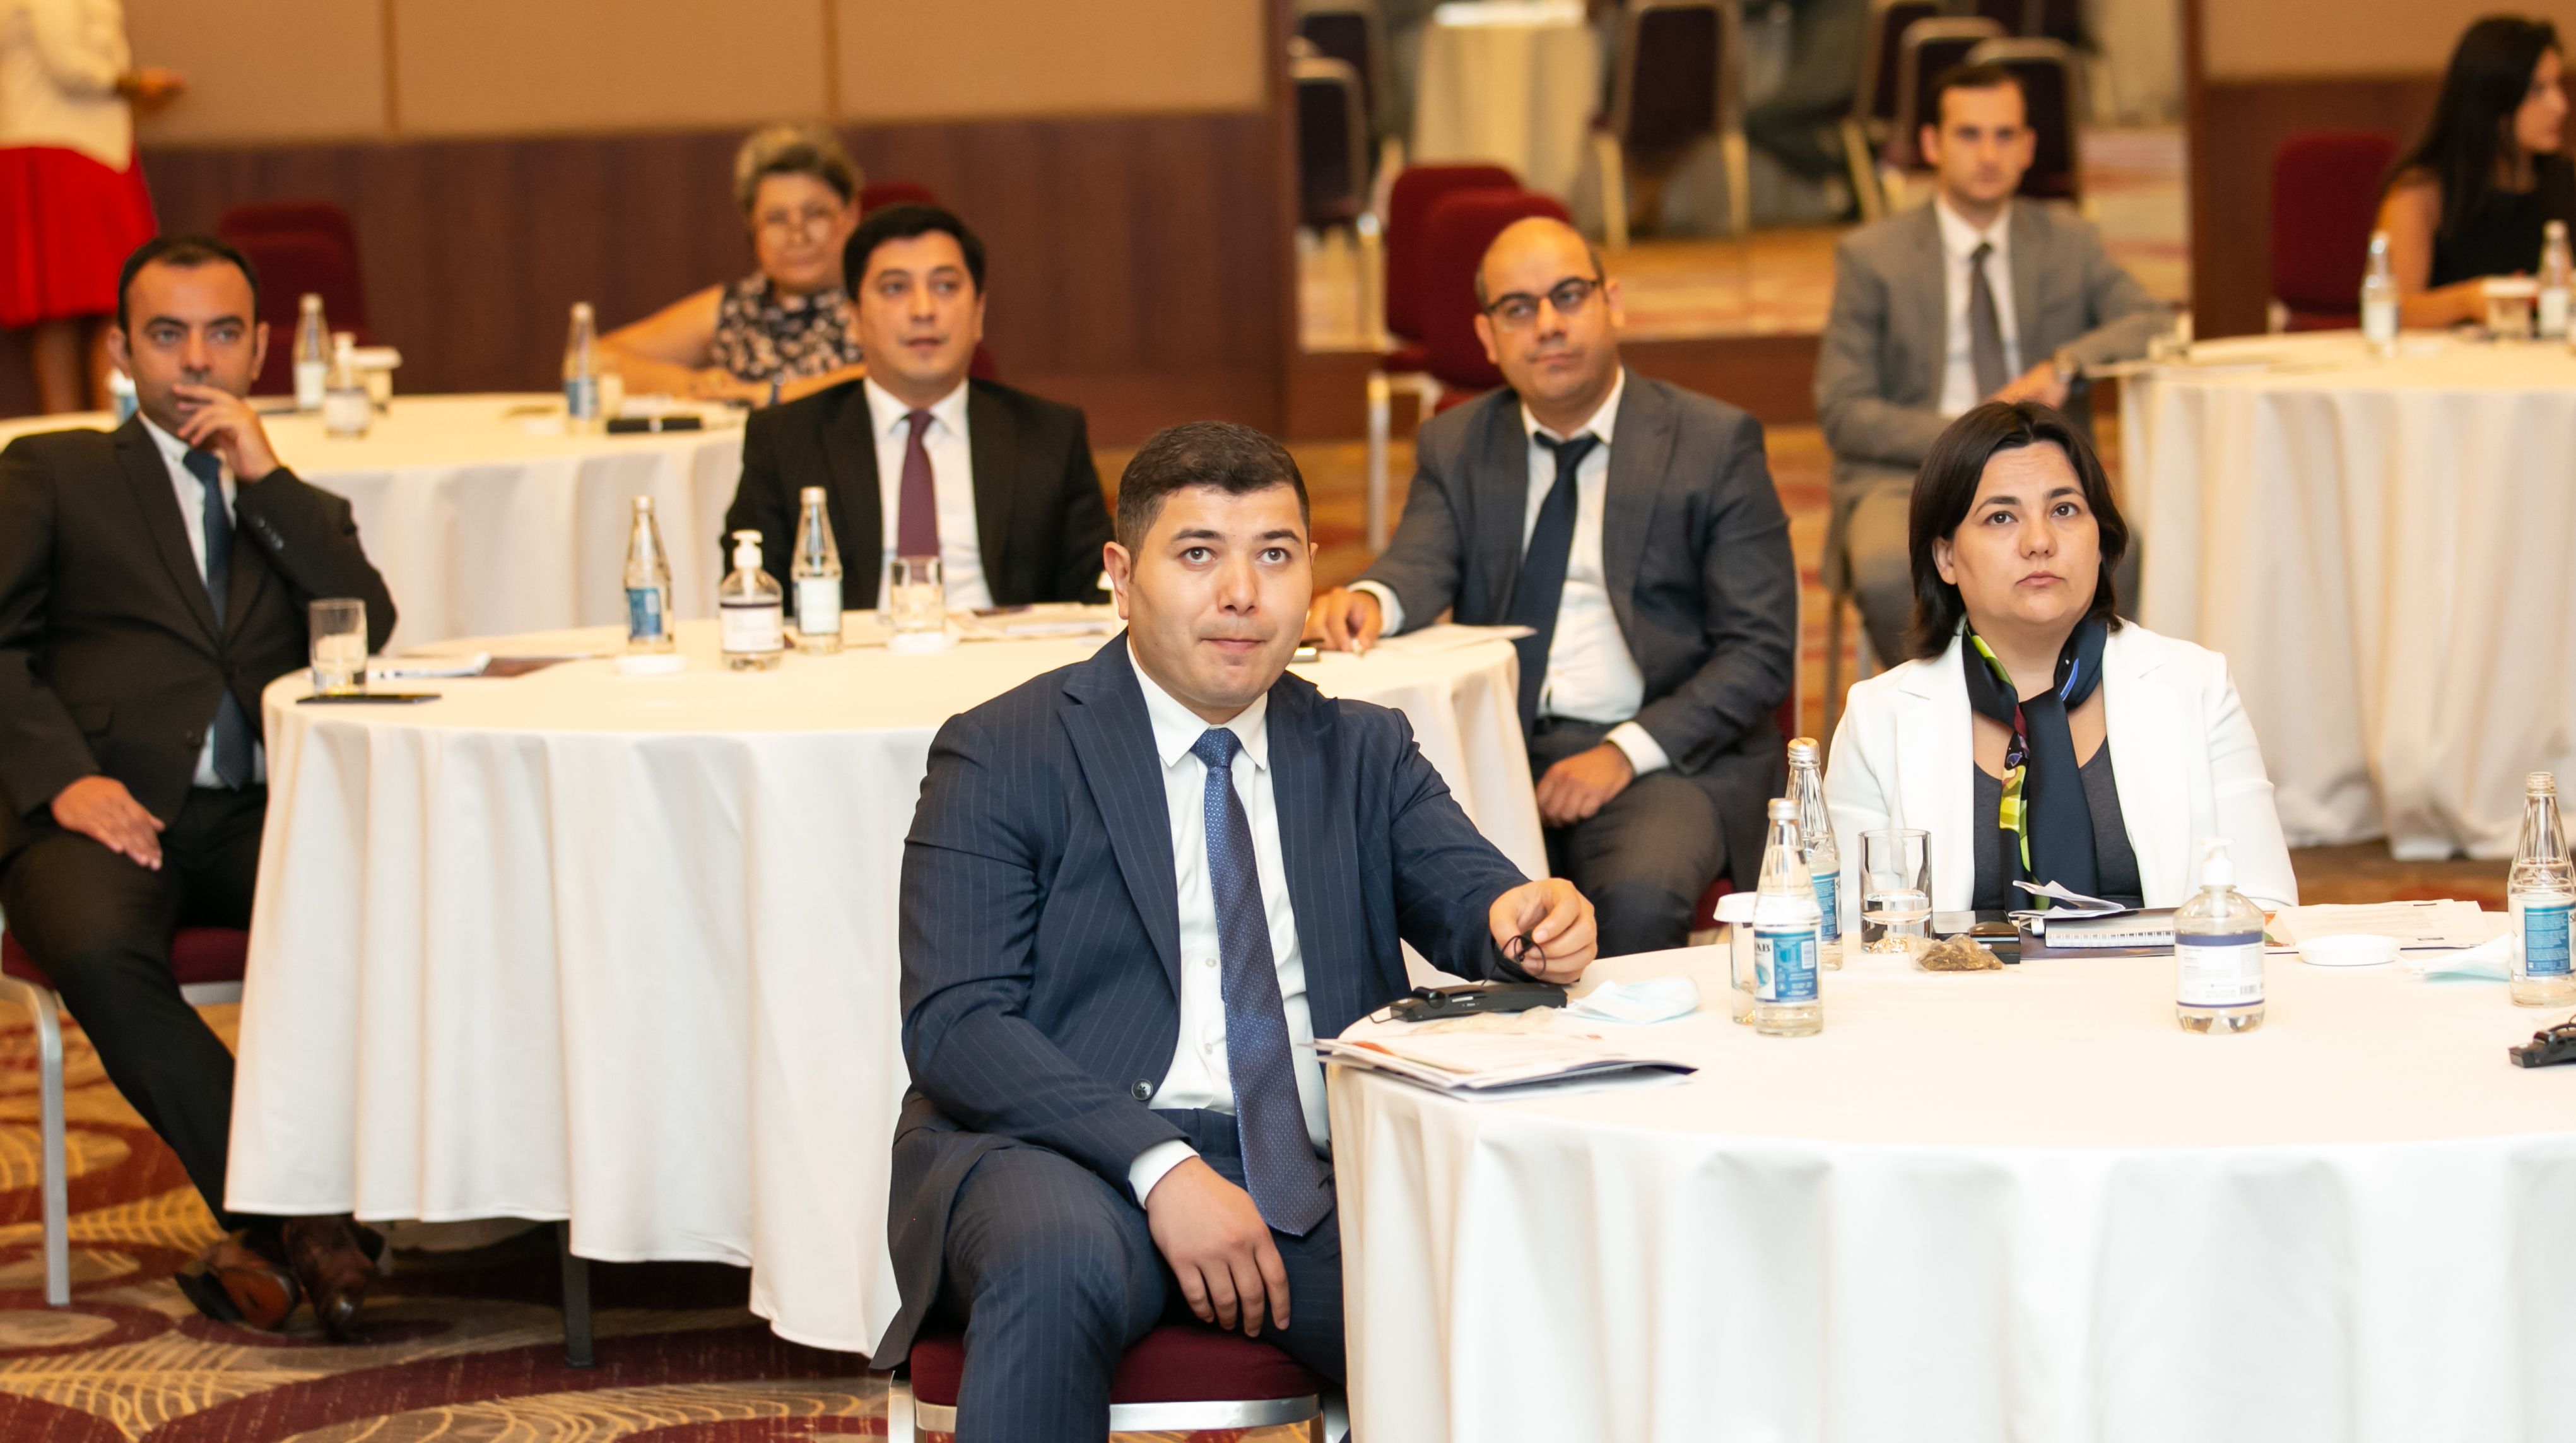 Intermediate Meeting of the project successfully took place on August 3, 2021 in Baku. 